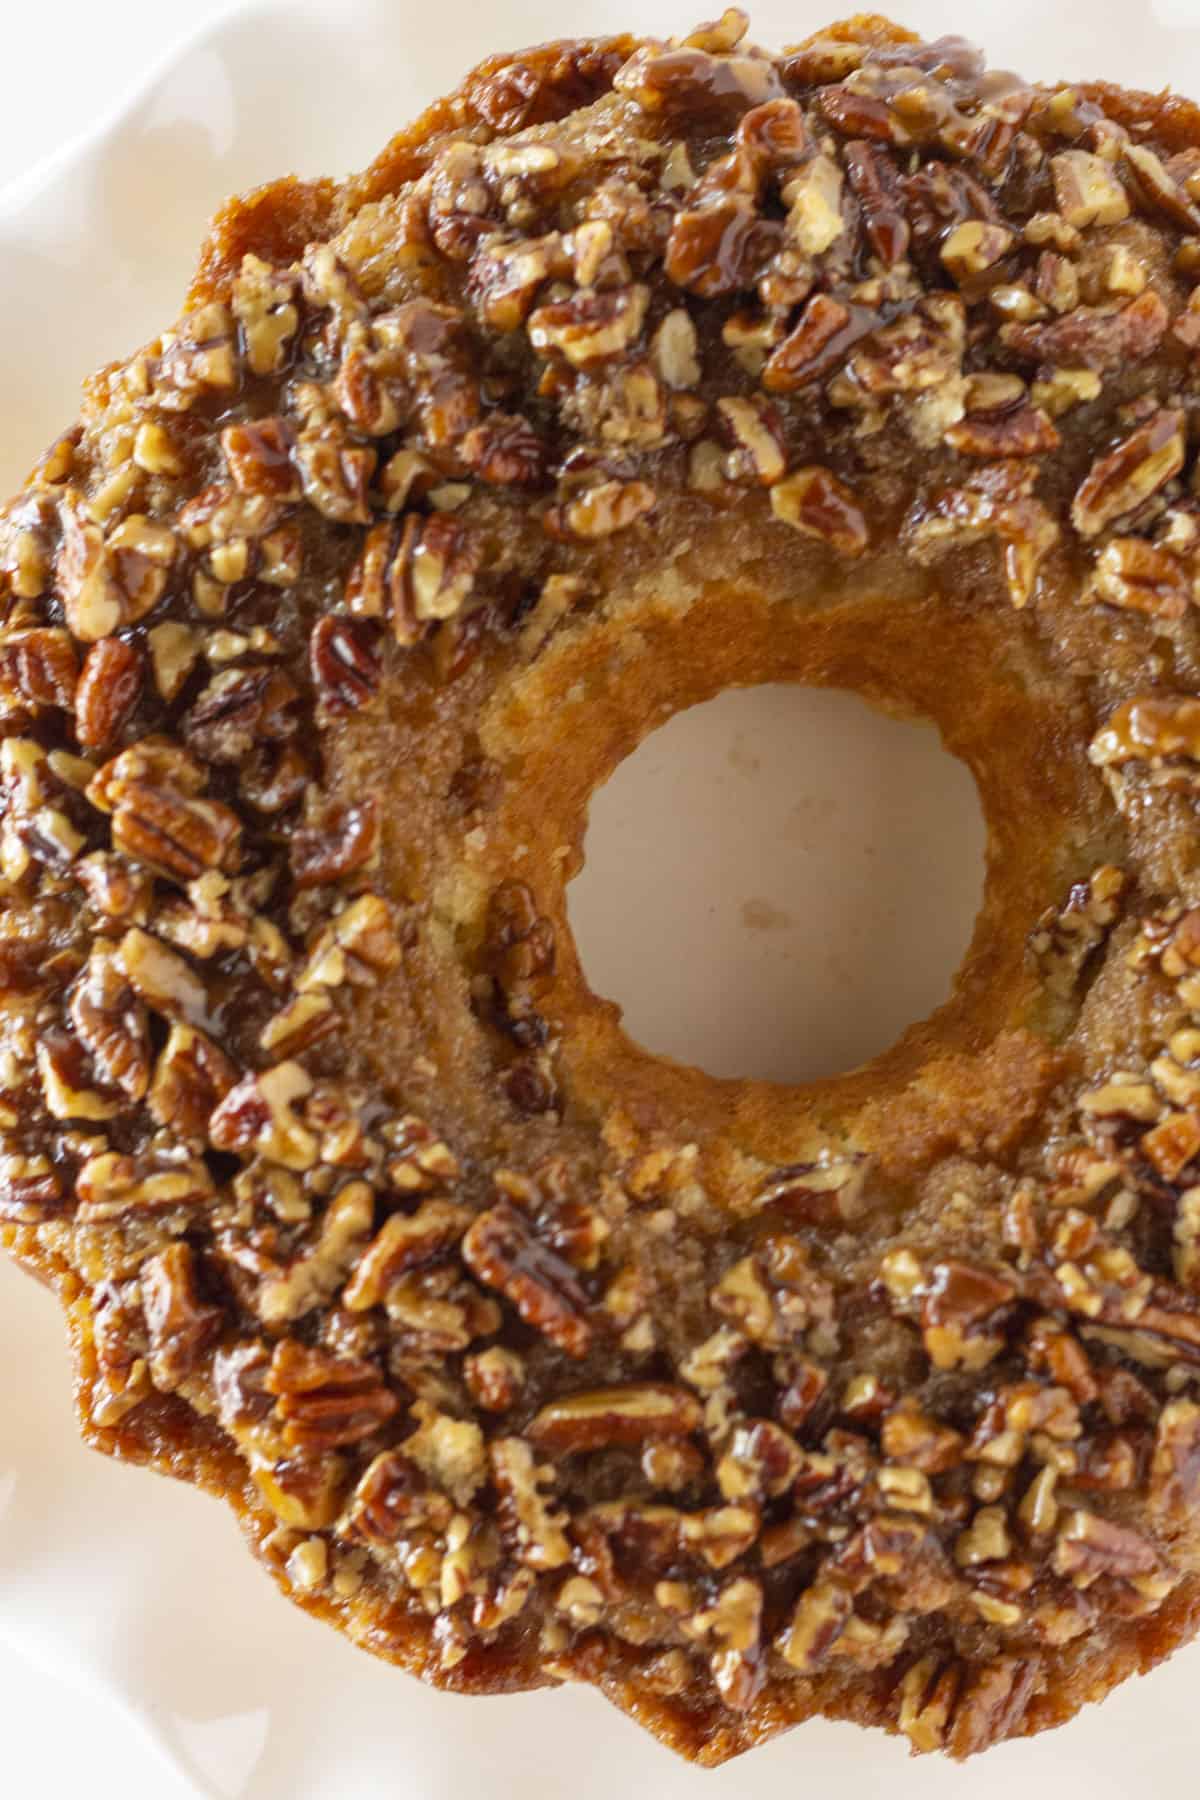 Looking down onto a pecan upside down cake on white cake plate.